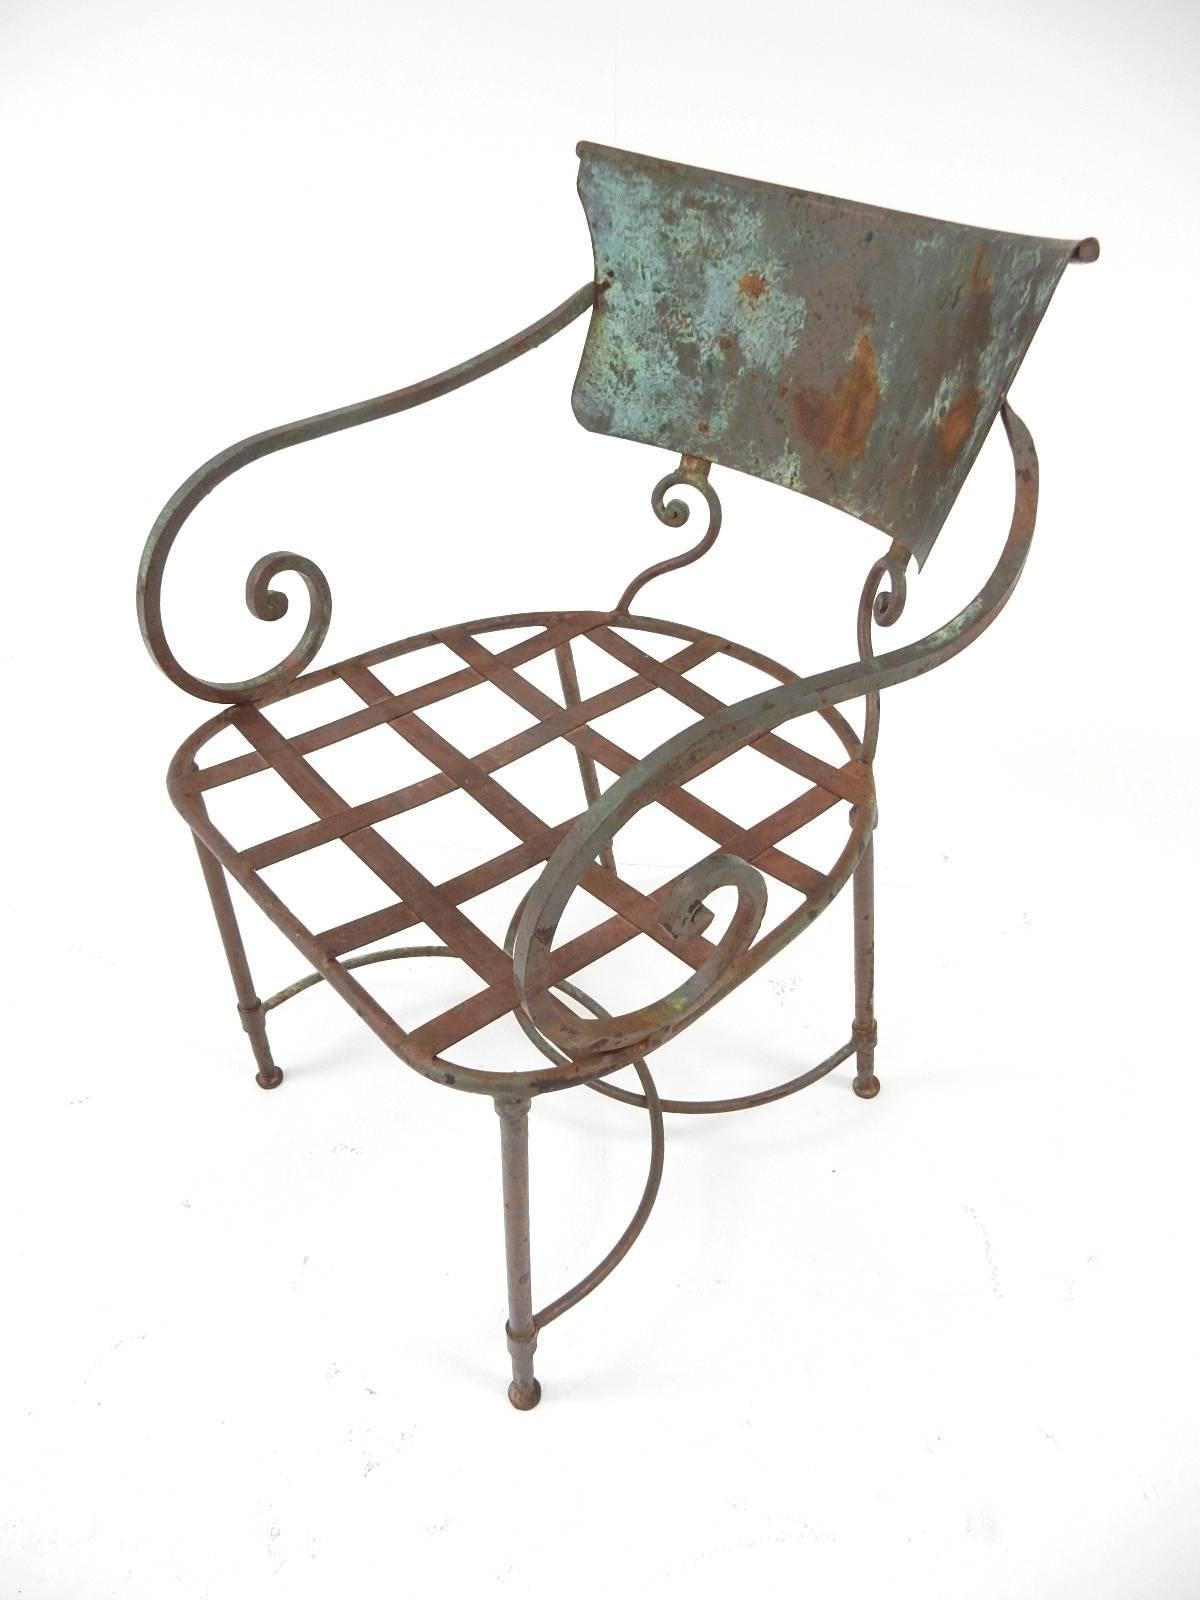 Amazing sculpted iron garden chairs. Very heavy and solid.
Completely original with beautiful aged paint and patina.
Sold individually.